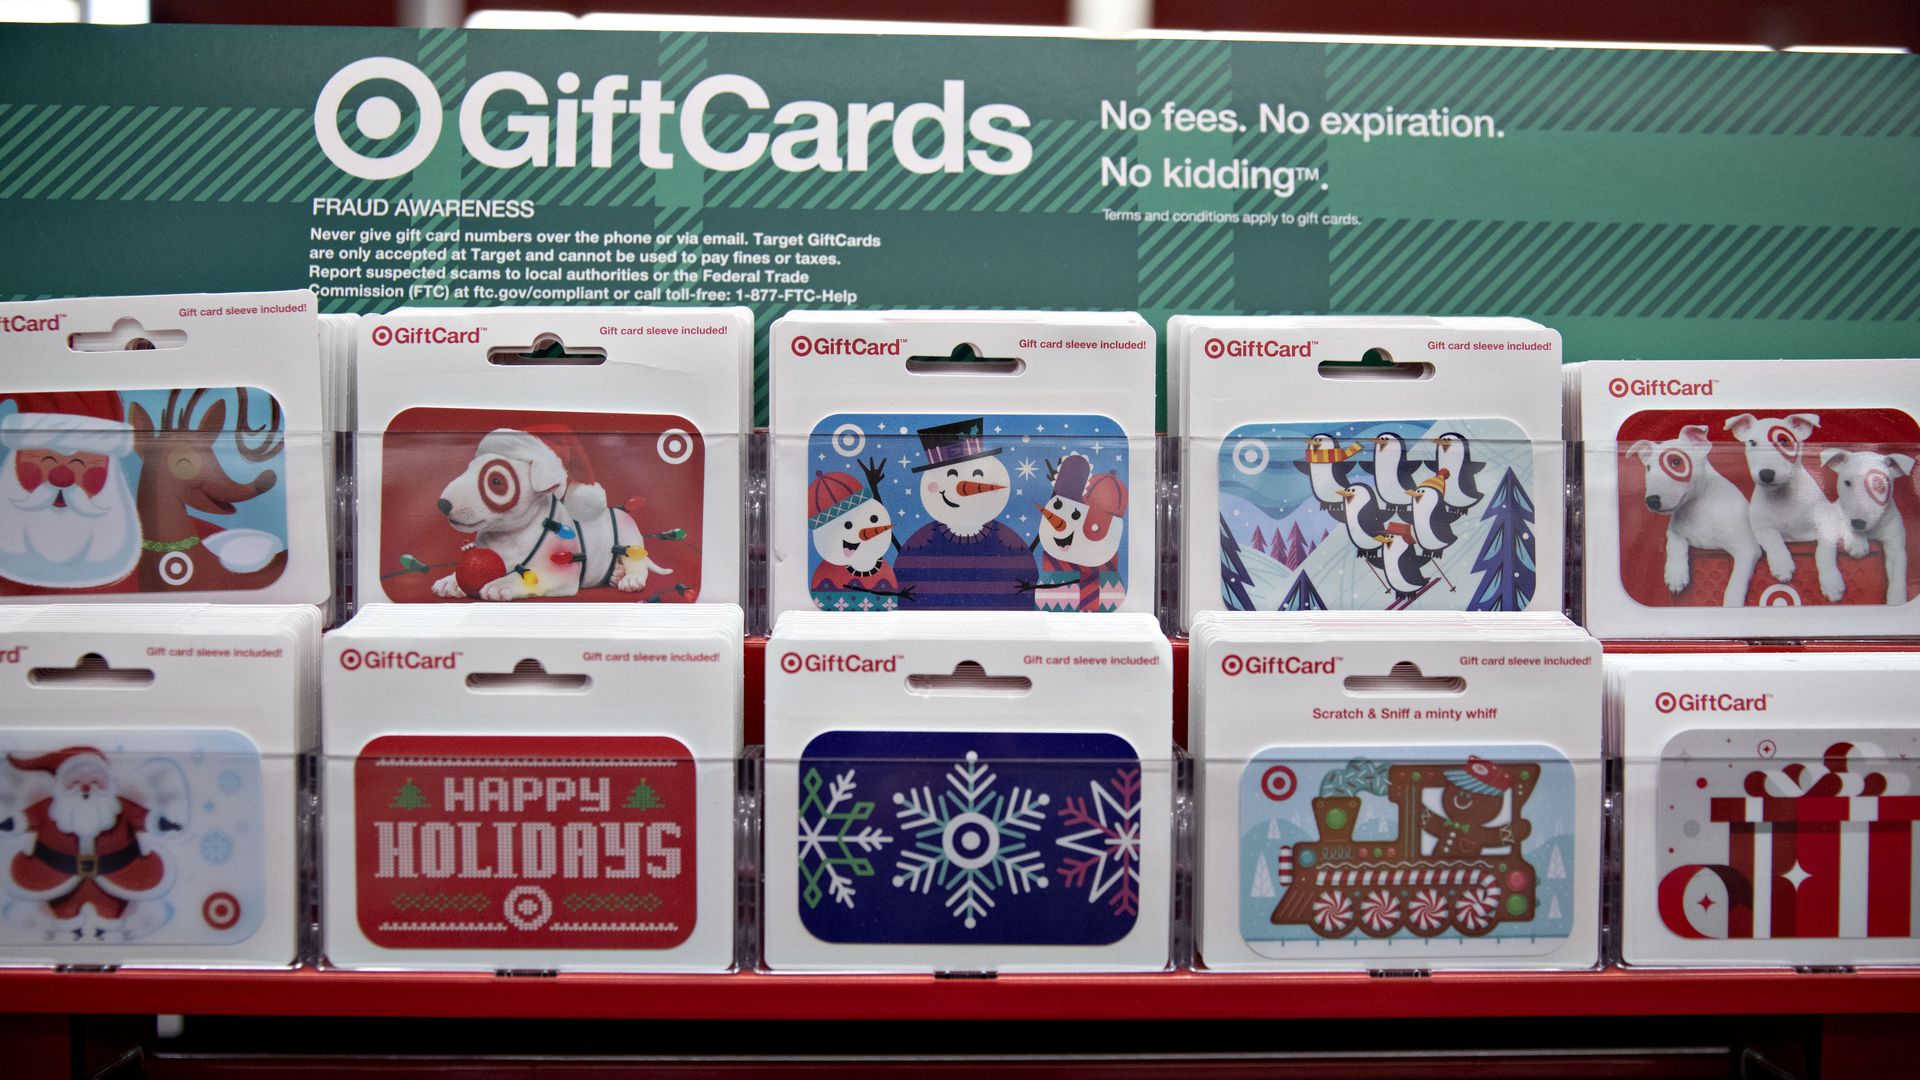 EXPIRED) 10% off Target gift cards for Redcard holders